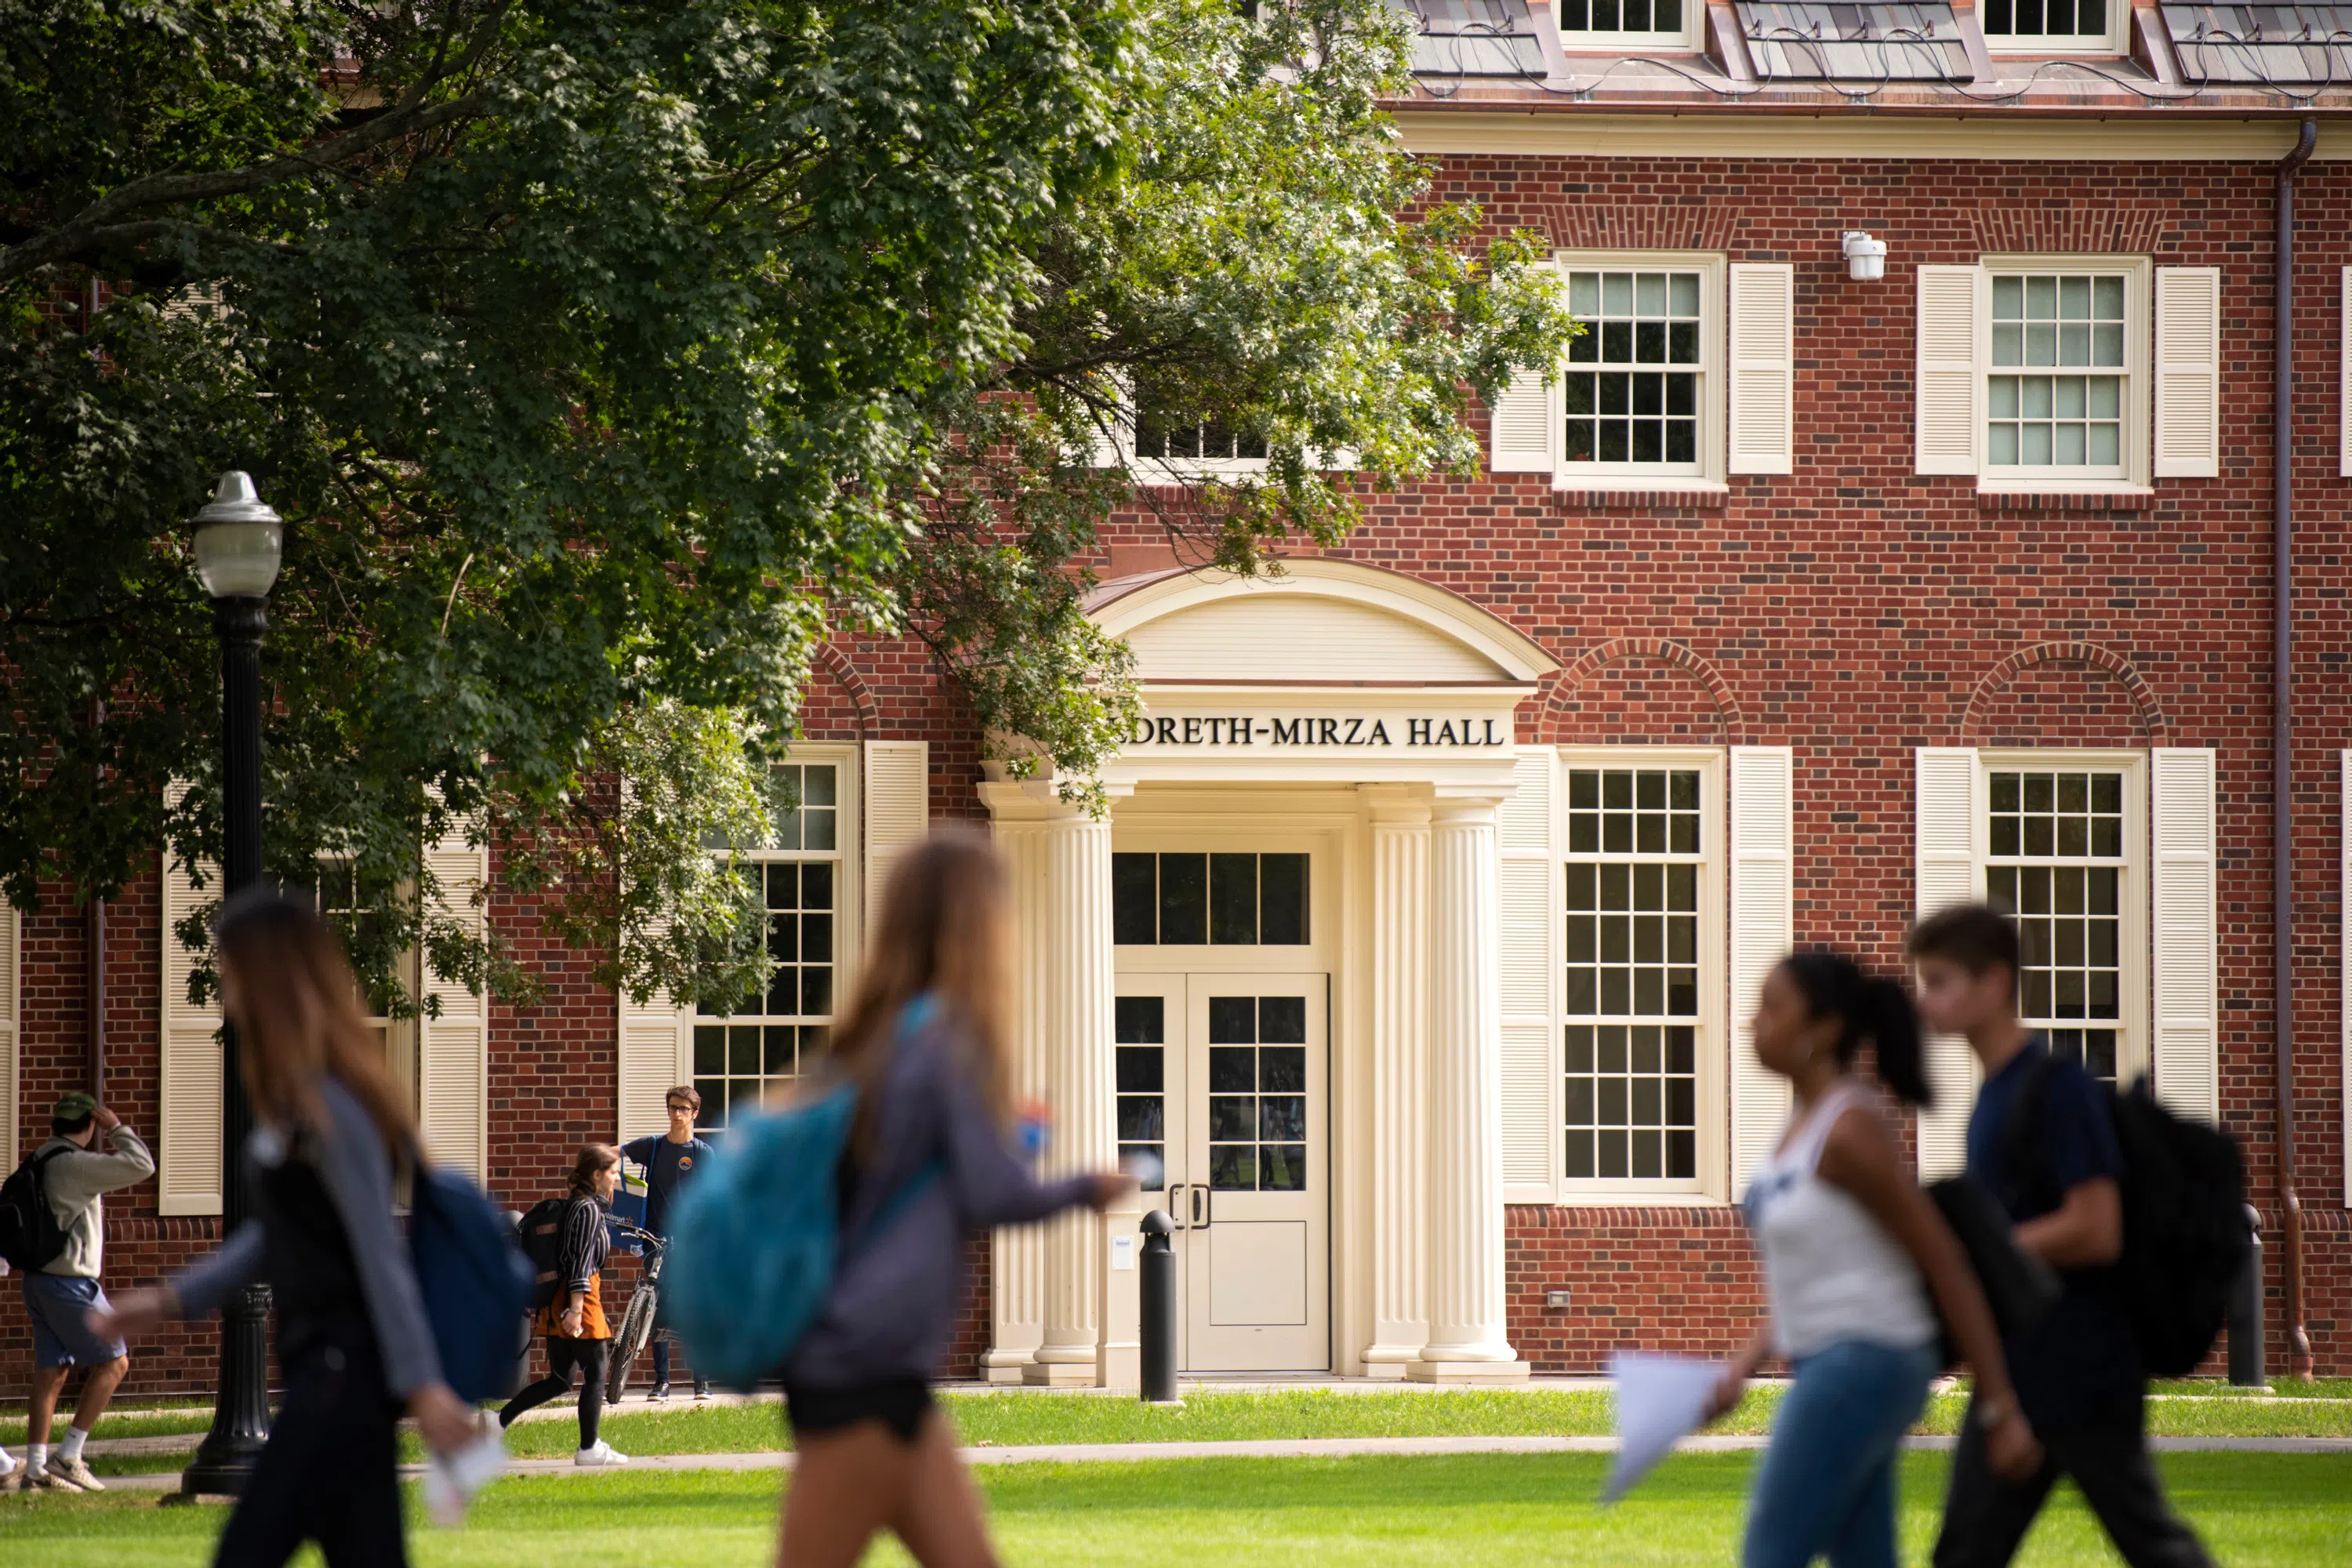 students walk past the front exterior of Hildreth-Mirza Hall